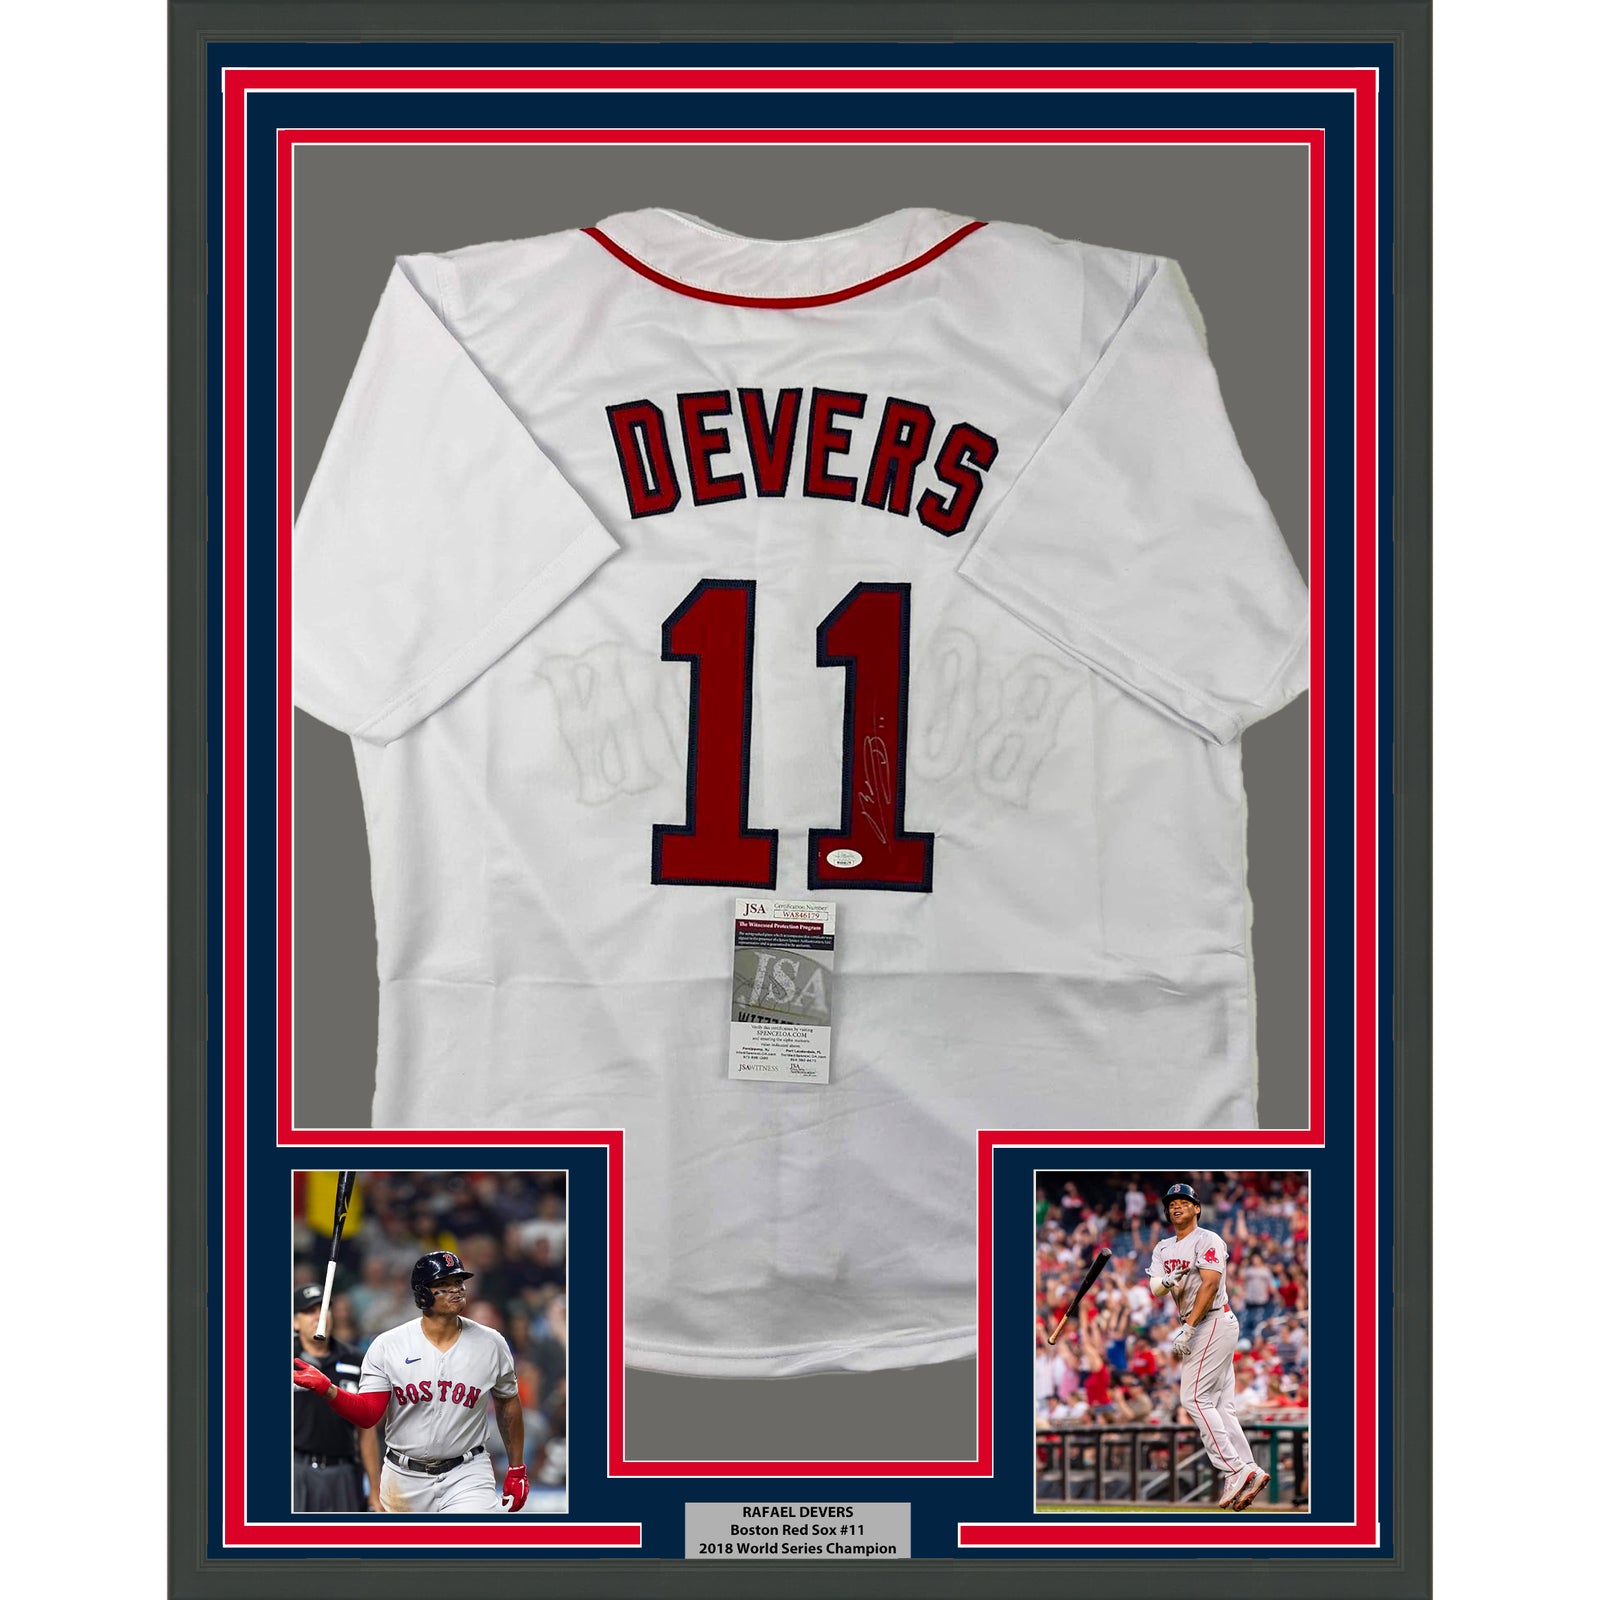 red sox jersey devers